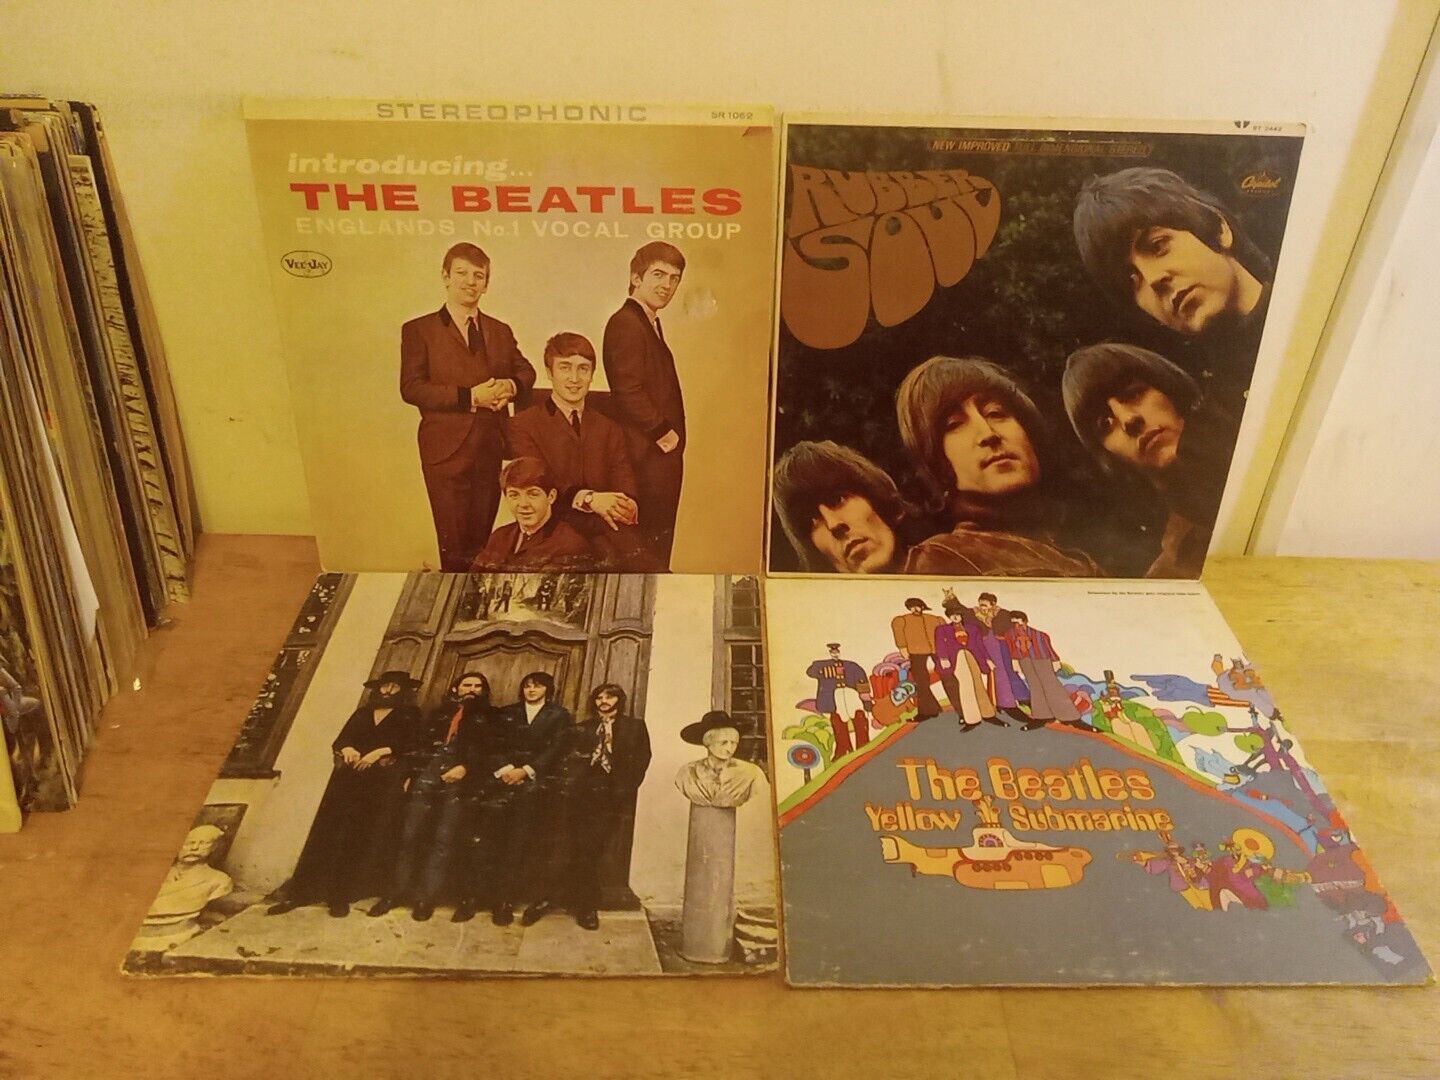  Beatles Lot Of 4 Stereo Early Press ,Submarine, Soul,hey Jude,introducing Vg